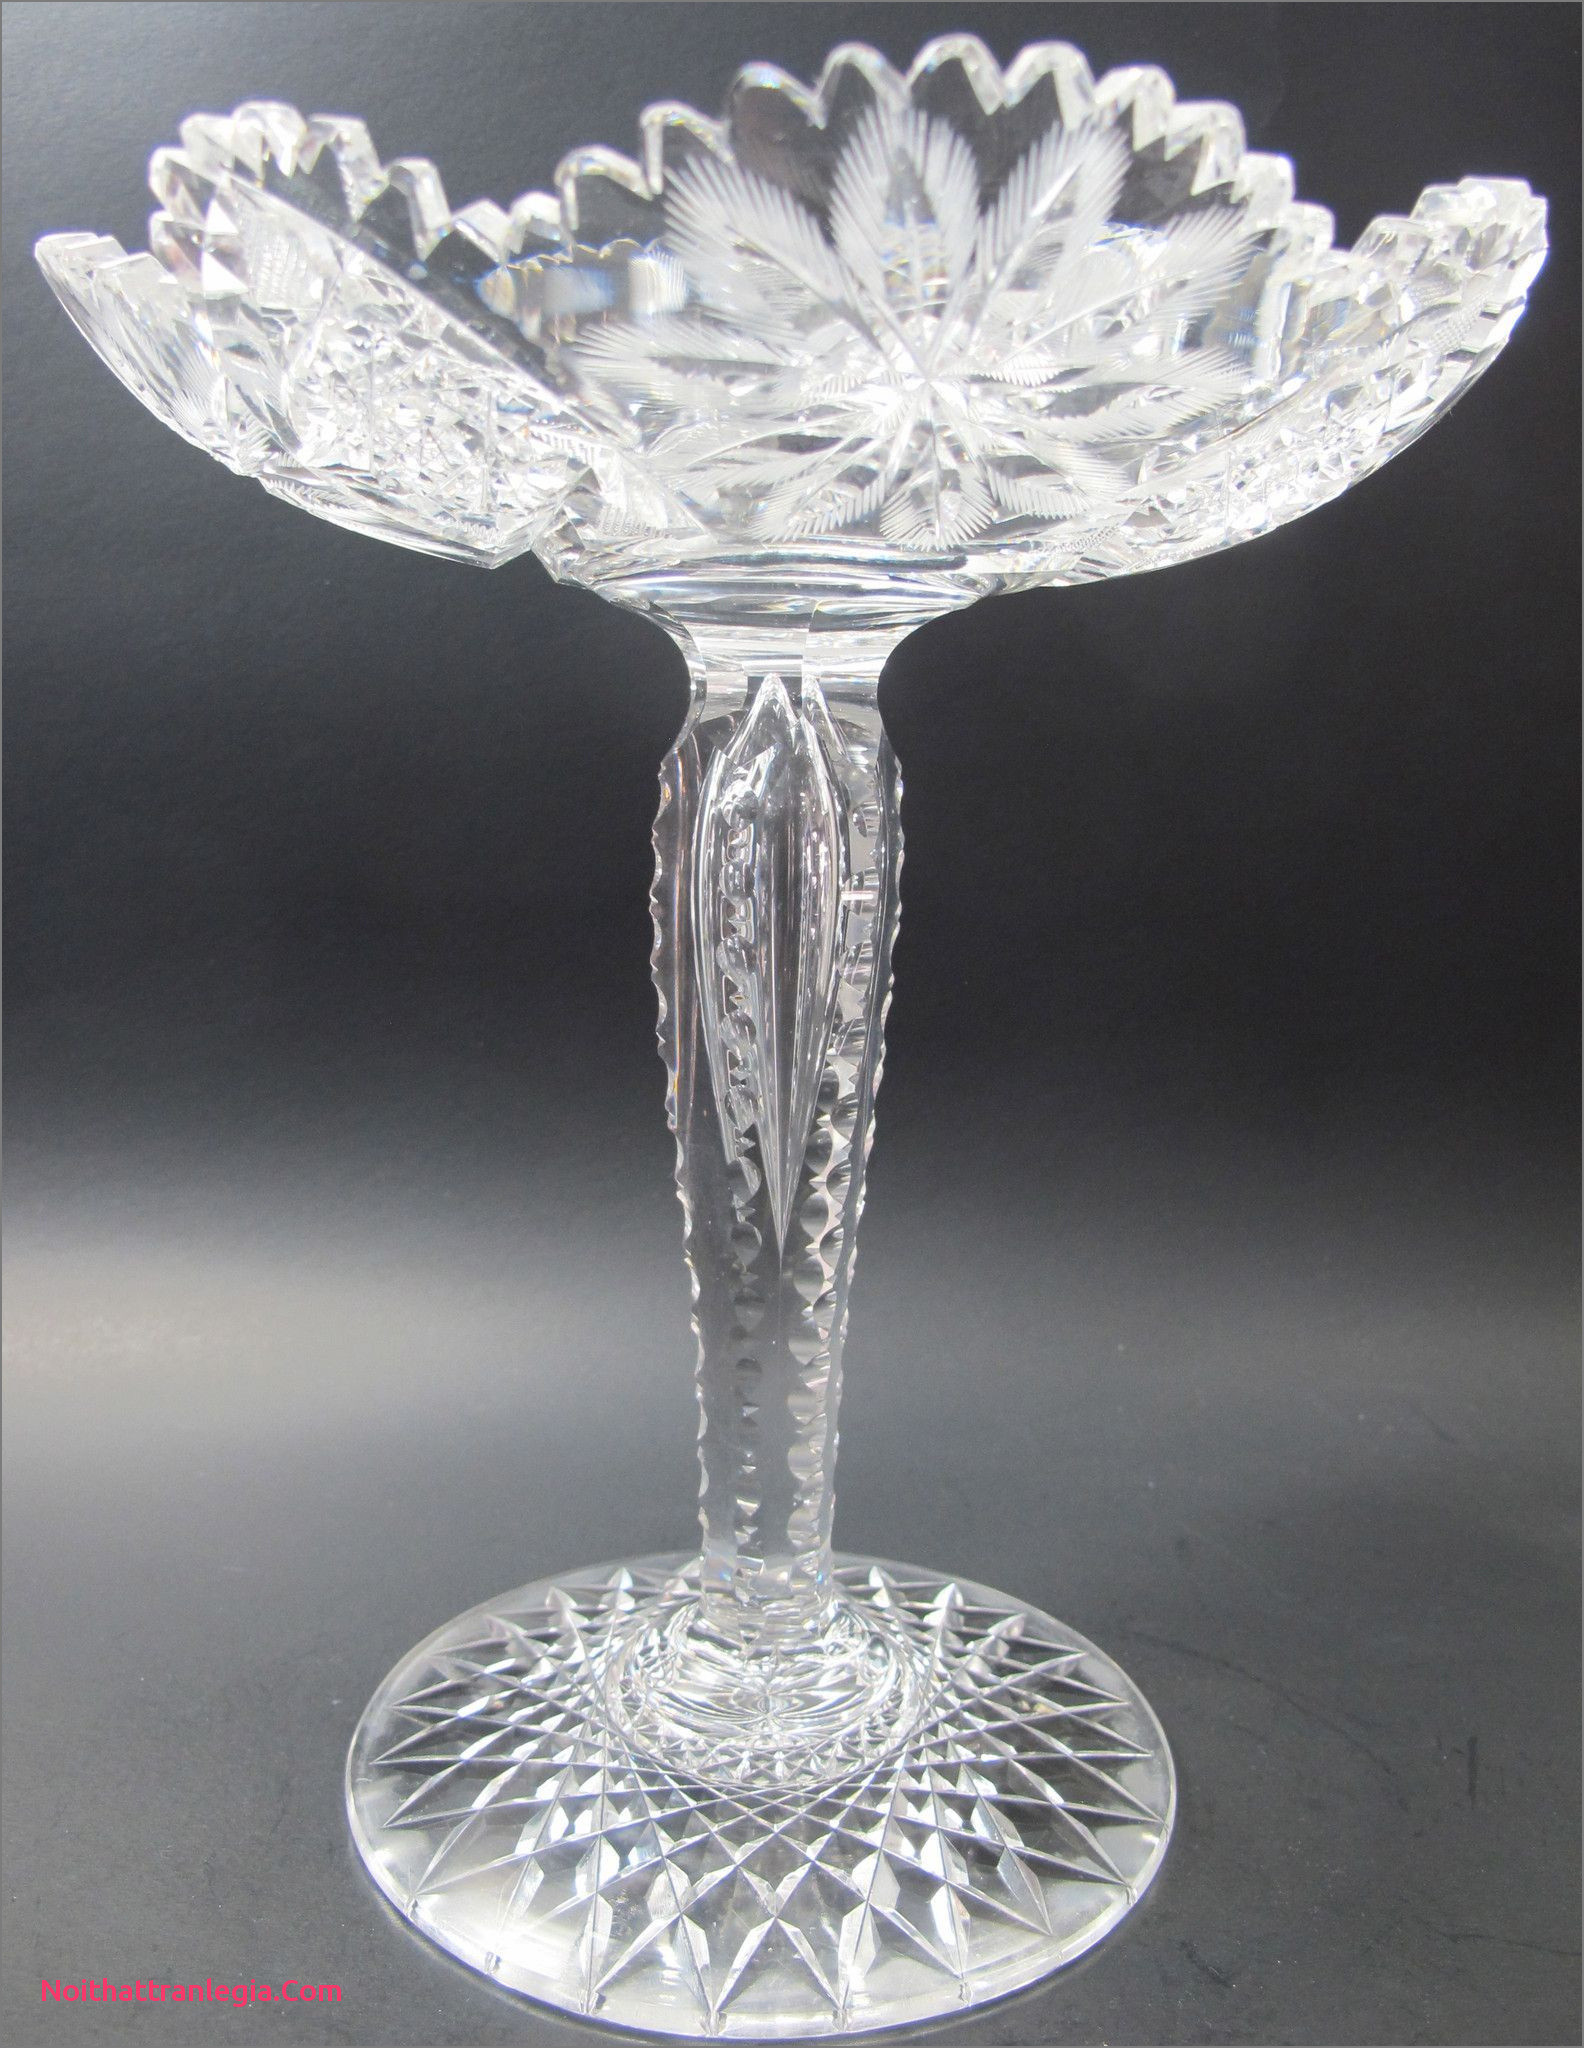 14 Cute Vintage Cut Glass Vase 2022 free download vintage cut glass vase of 20 cut glass antique vase noithattranlegia vases design in fering this abp antique cut glass pote from the american brilliant period 1886 1916 9 5